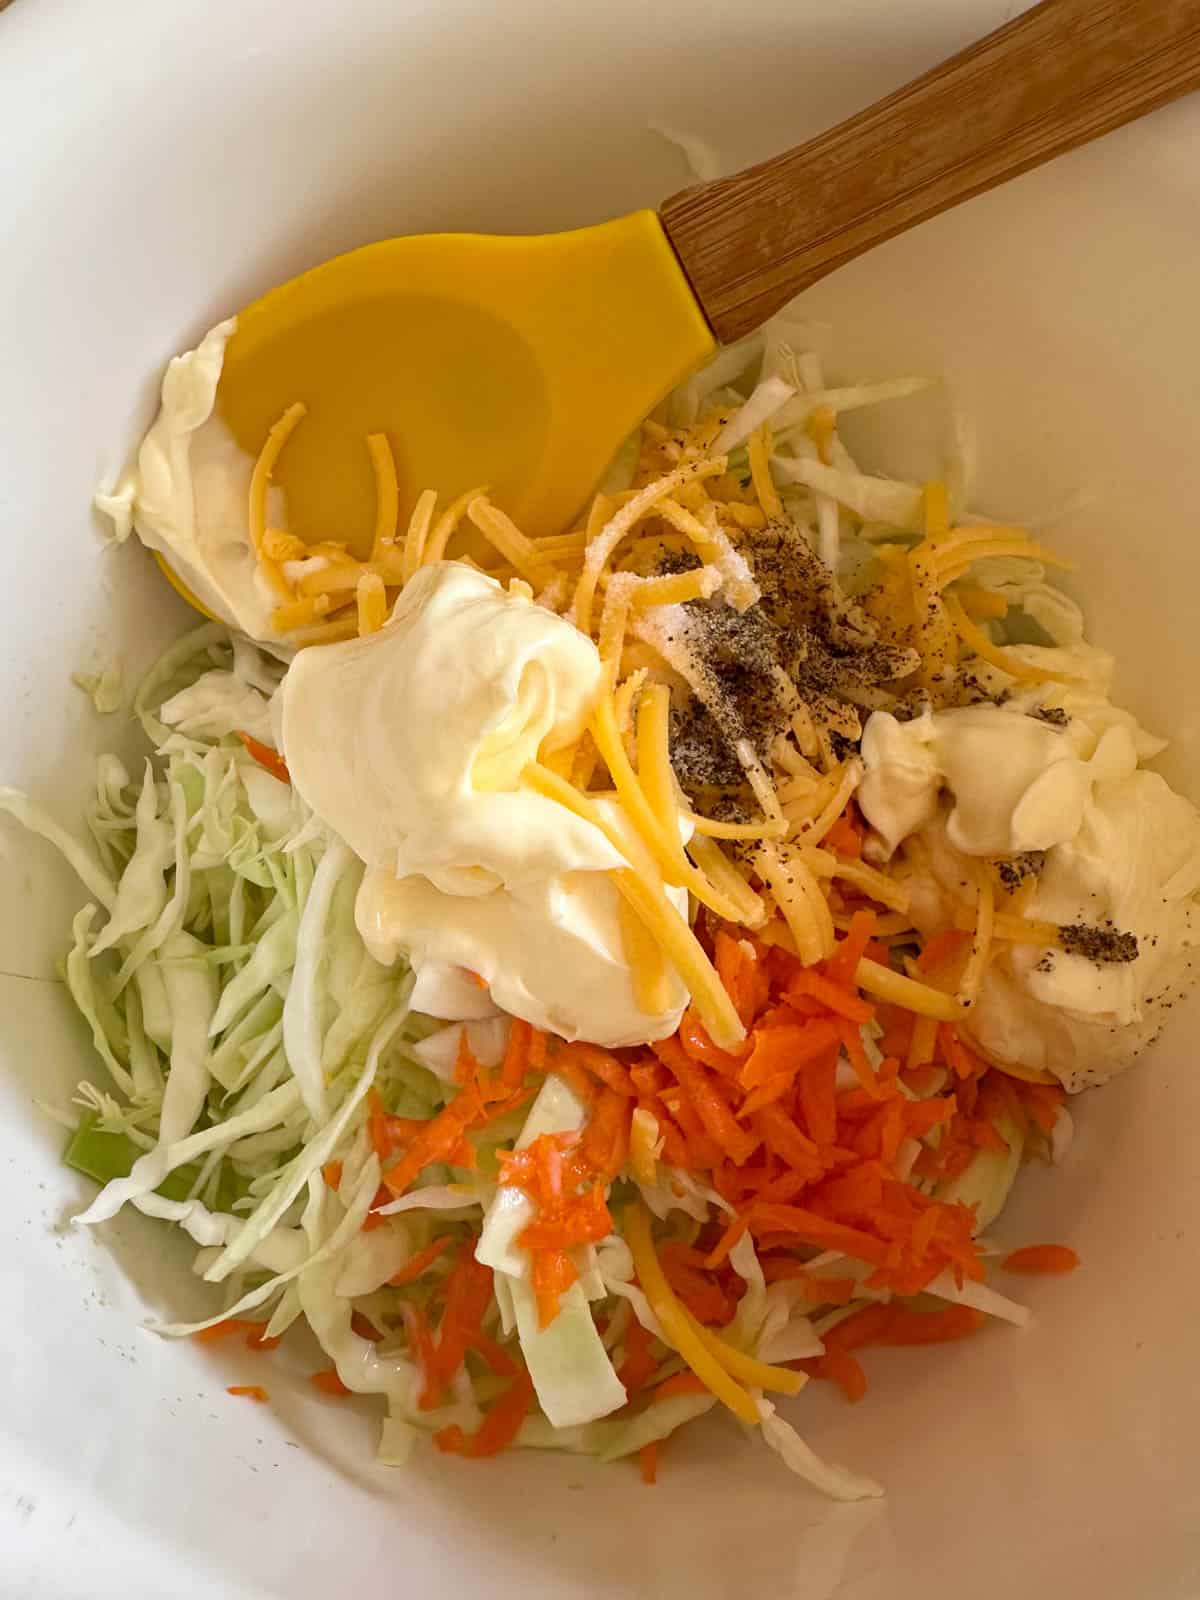 A mixing bowl containing the coleslaw ingredients including shredded cabbage and carrots, mayonnaise, and salt and pepper. There is a yellow spoon with a wooden handle in the bowl.